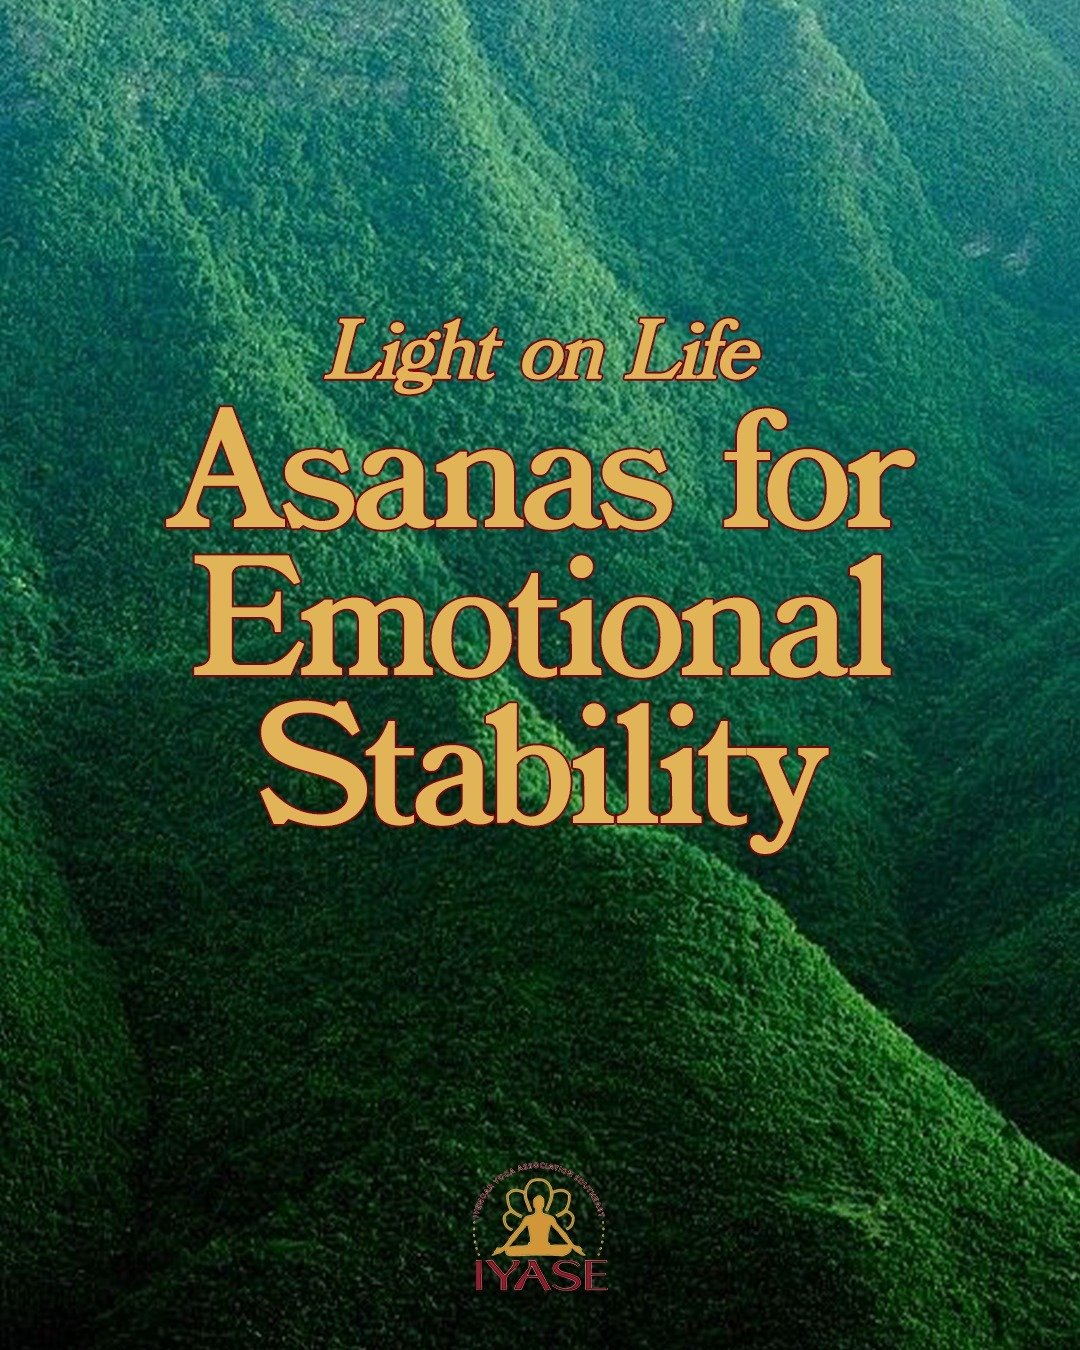 #Repost #WorkshopWednesday Asanas for Emotional Stability from Light on Life by BKS Iyengar. Courtesy of @iyengaryogalondon ❤️ Links to the pdf, further reading, and more resources will be linked in our stories and in the &quot;Sequences&quot; Highli